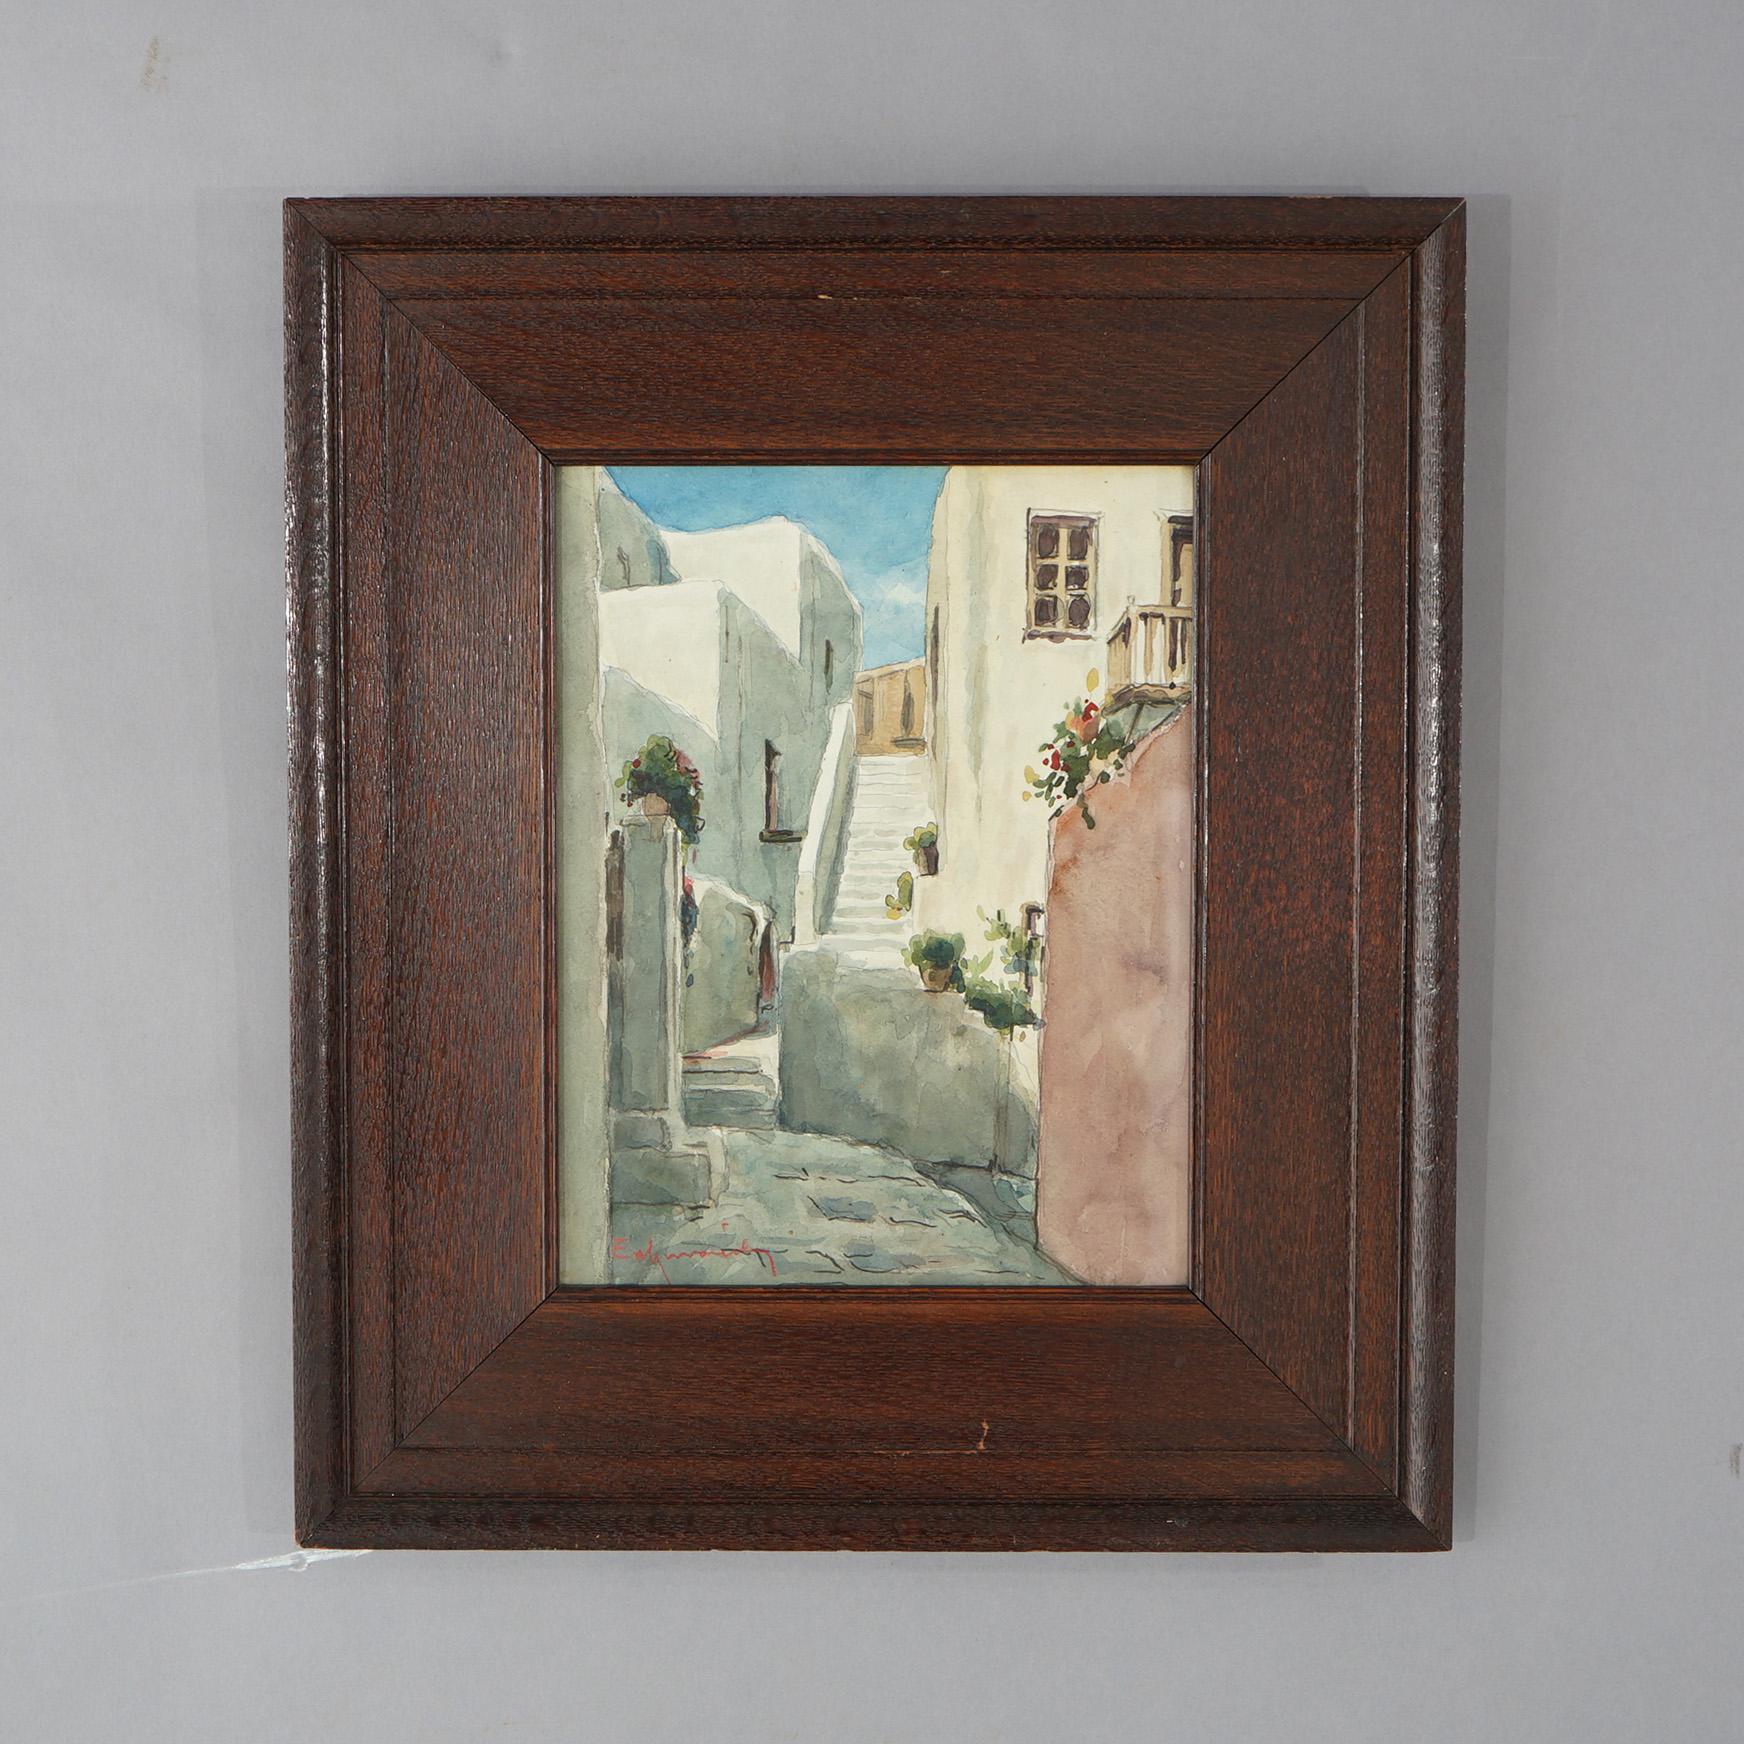 An antique painting in the manner of Taos School offers watercolor on paper street scene, artist signed lower right, seated in Arts and Crafts Mission oak frame, c1910 

Measures - 20.75